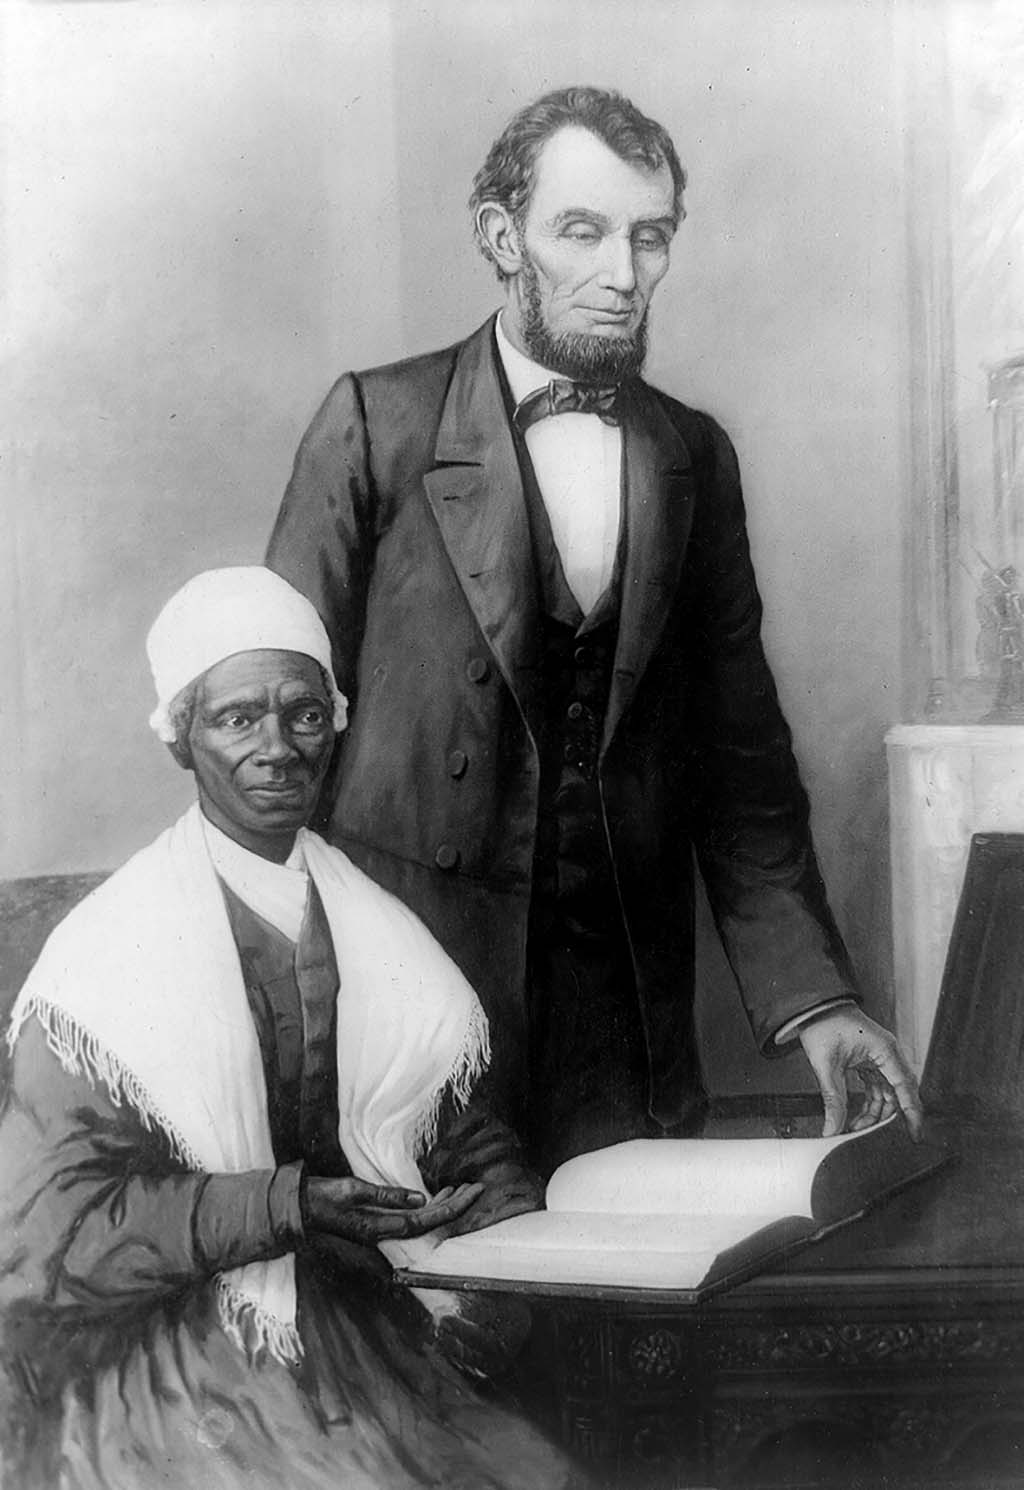 1851) Sojourner Truth “Ar'nt I a Woman?“